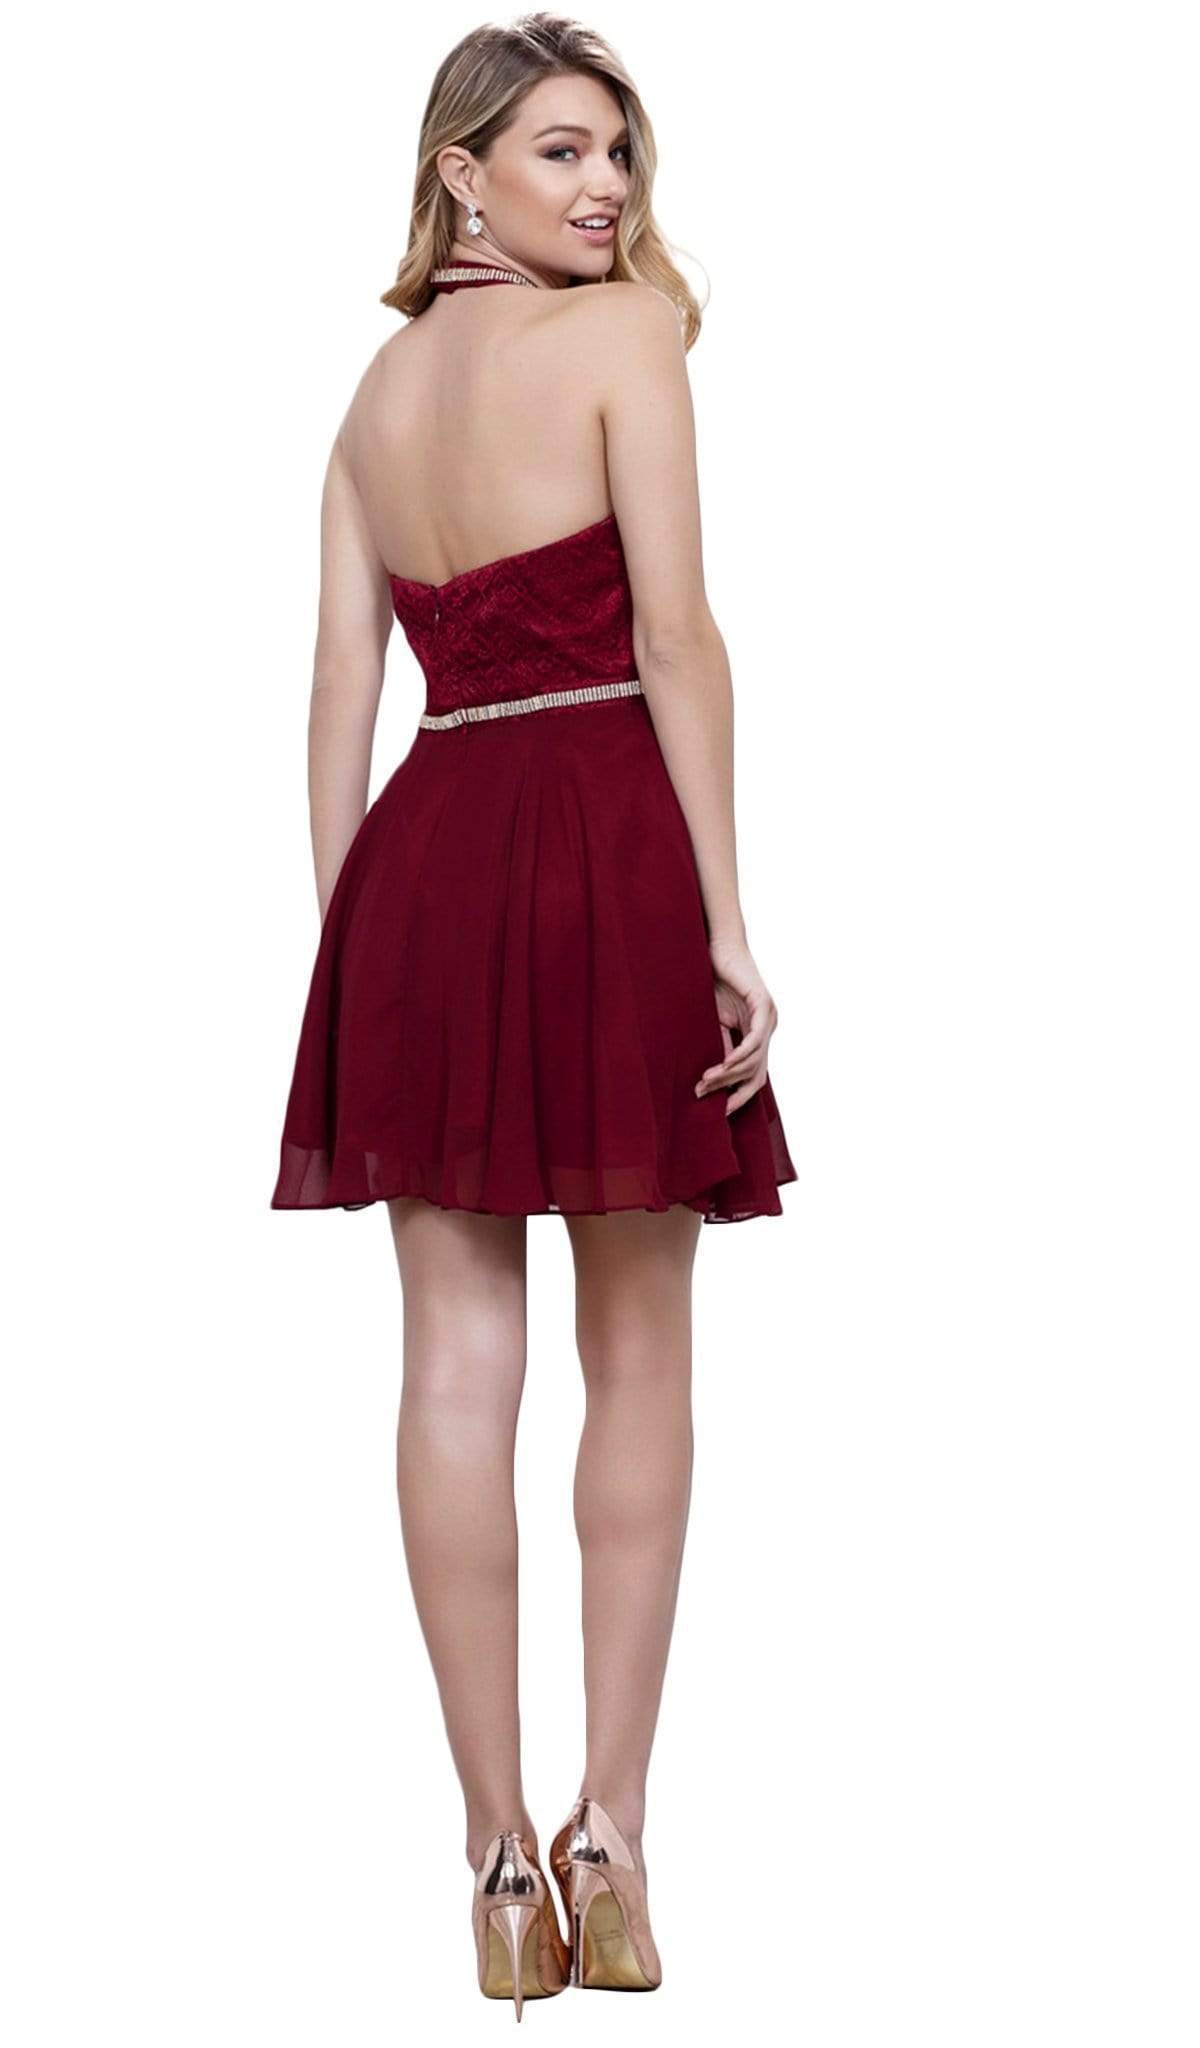 Nox Anabel - 6225 Illusion High Halter Lace Cocktail Dress Special Occasion Dress XS / Burgundy